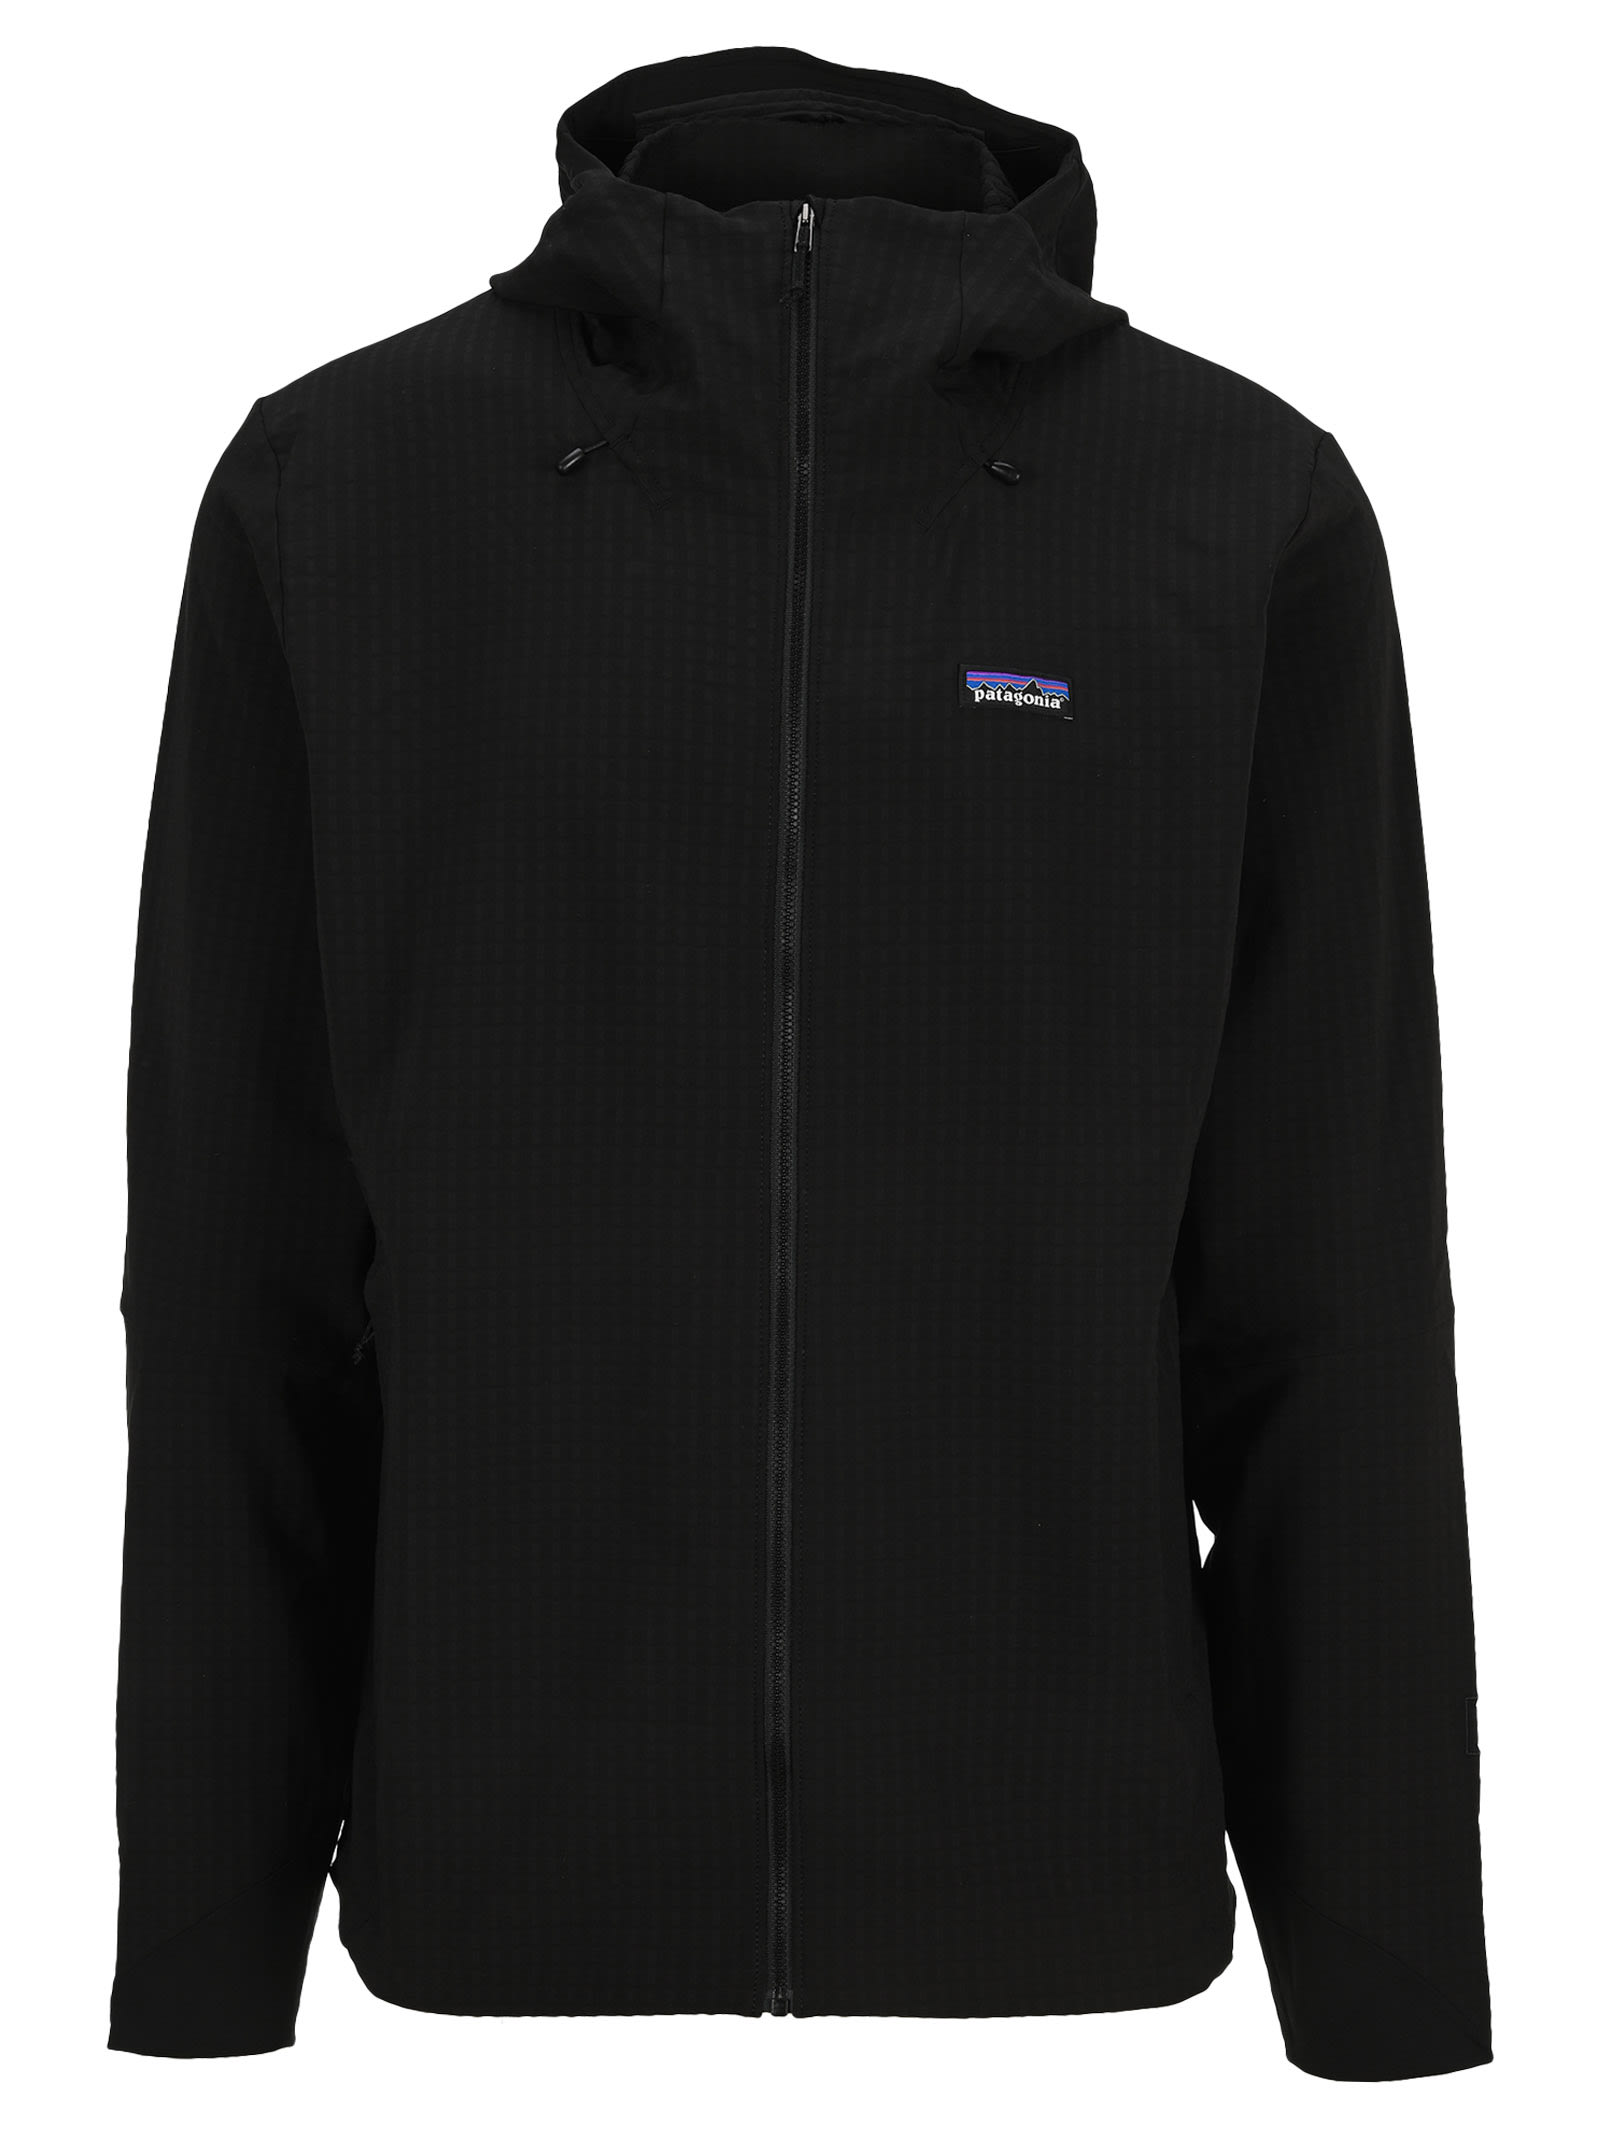 PATAGONIA TECHFACE HOODED JACKET,83576POLYESTERBLK